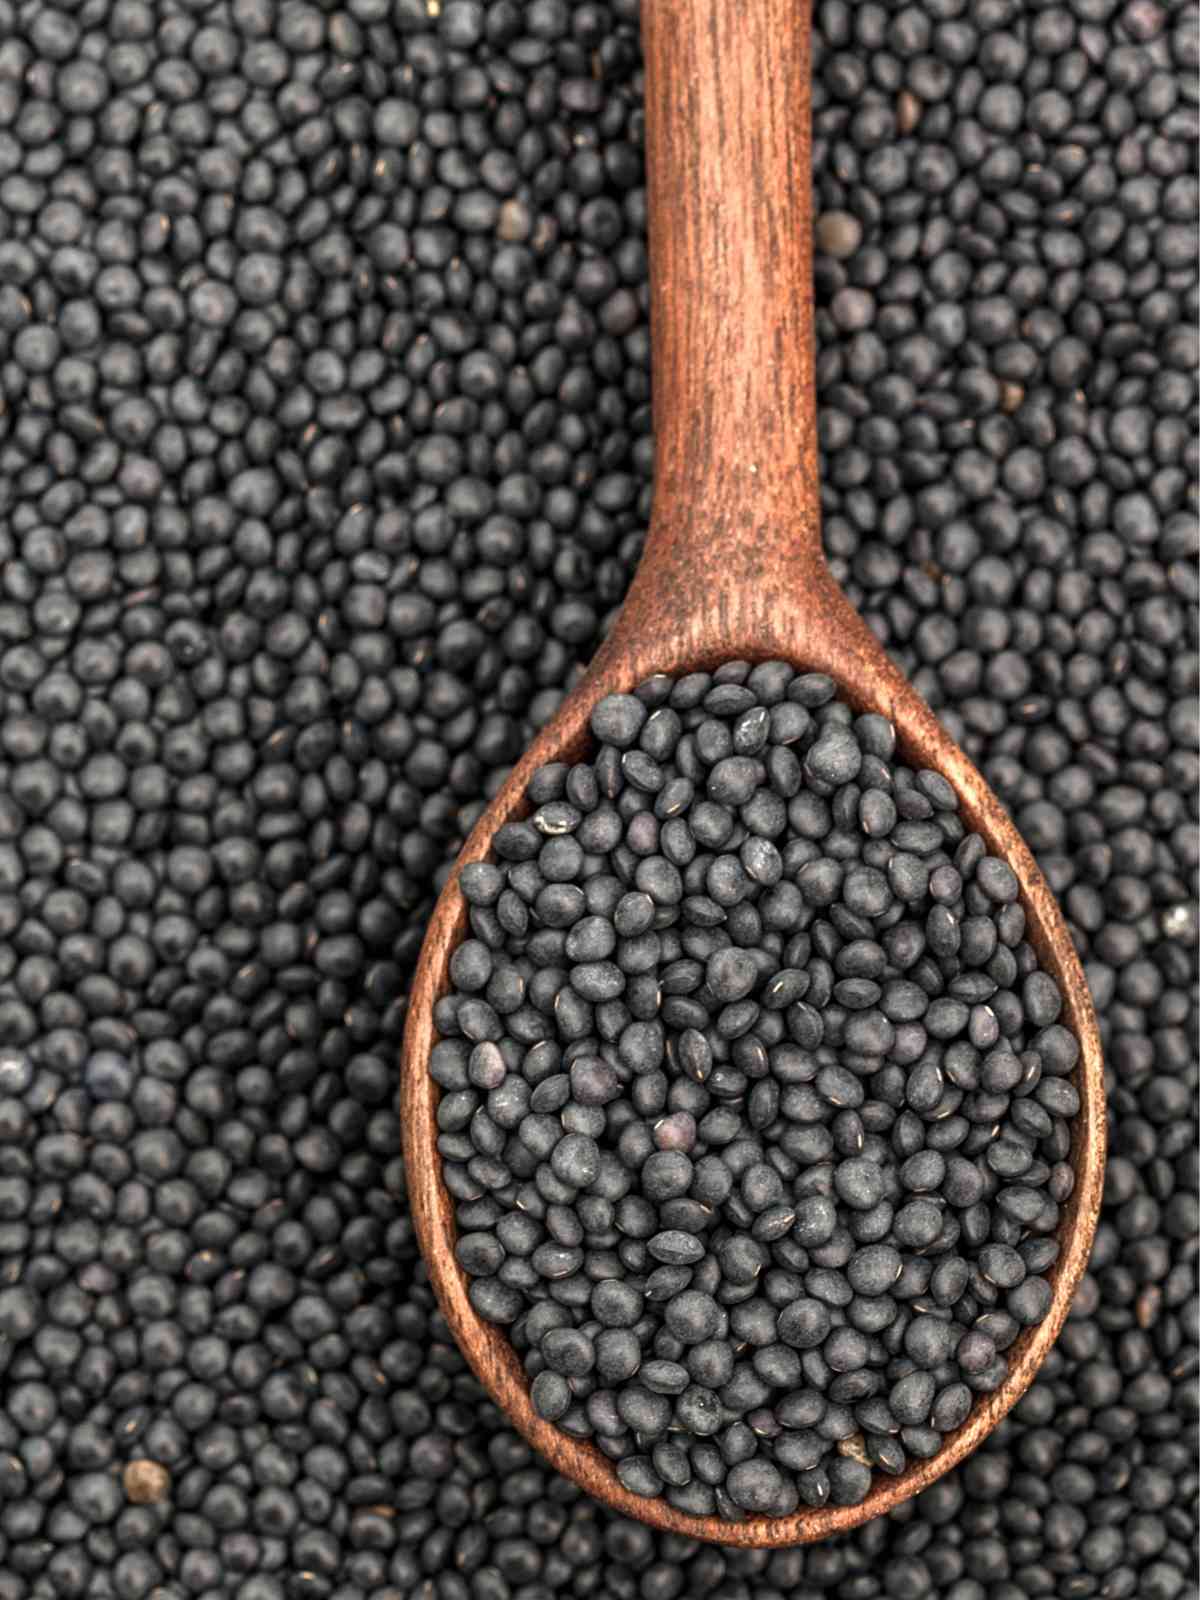 Black Lentils placed on wooden spoon. 